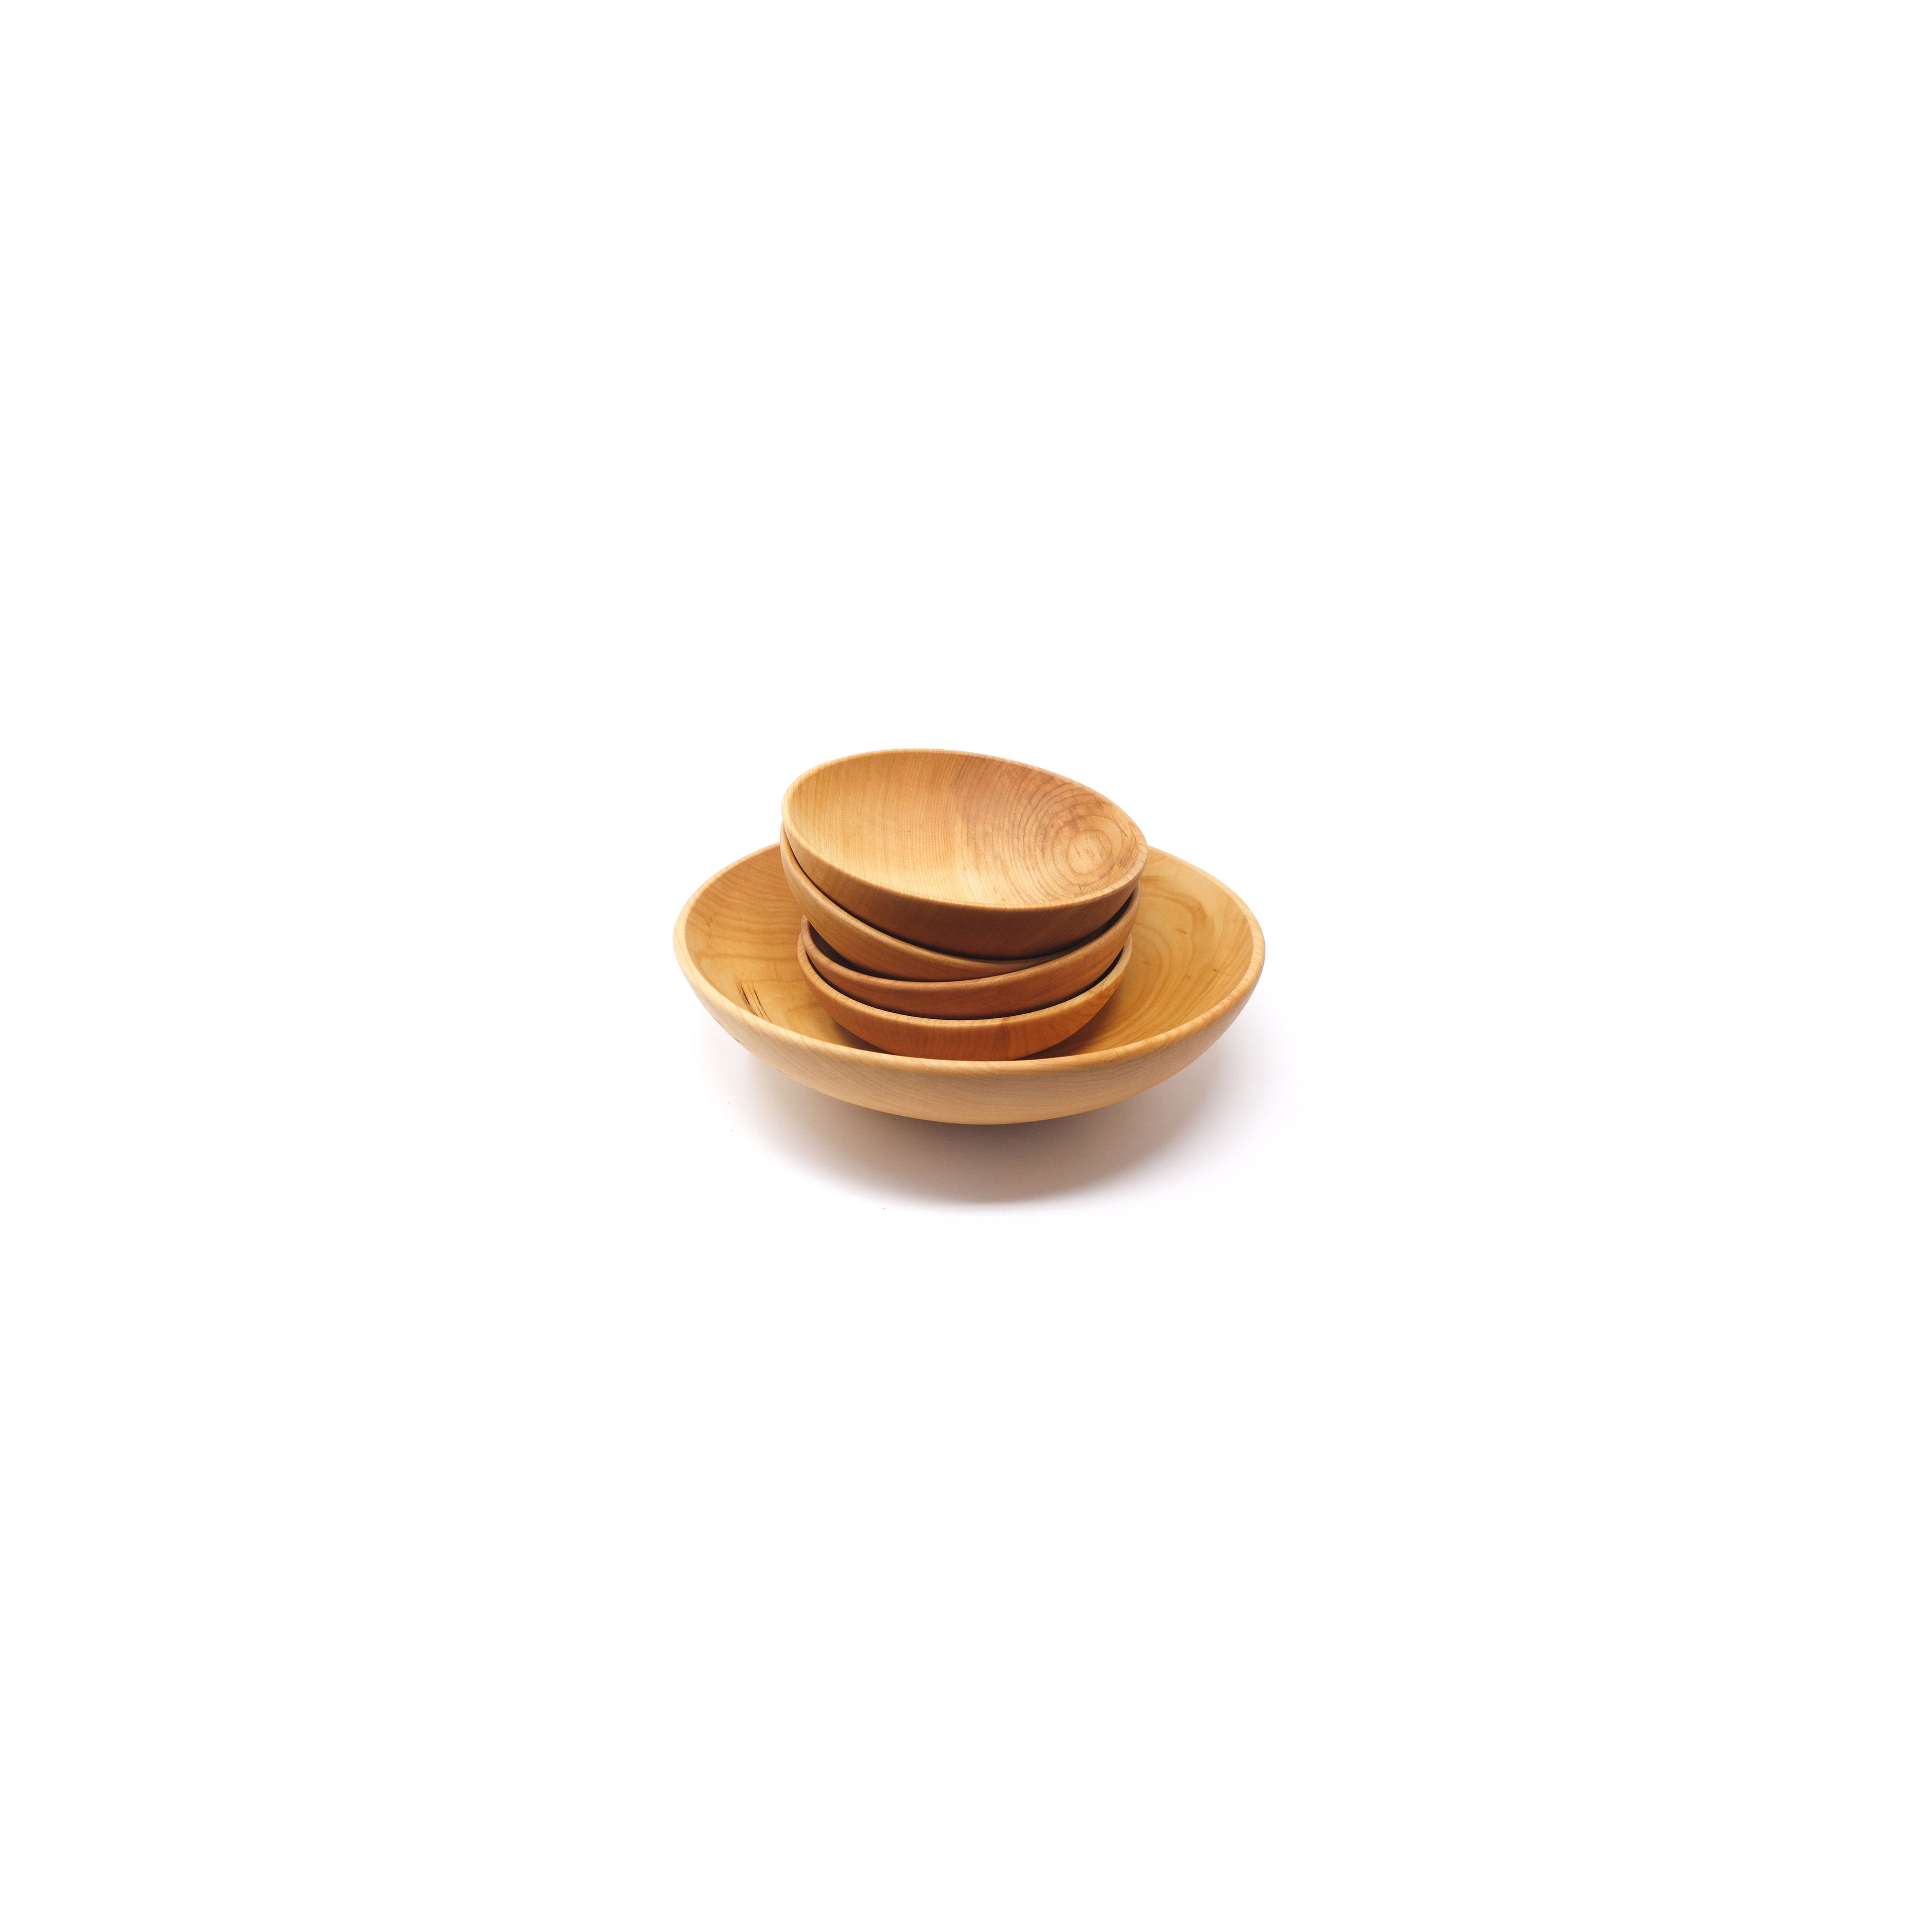 11 Inch Wooden Bowl Set - With 6 Inch Bowls